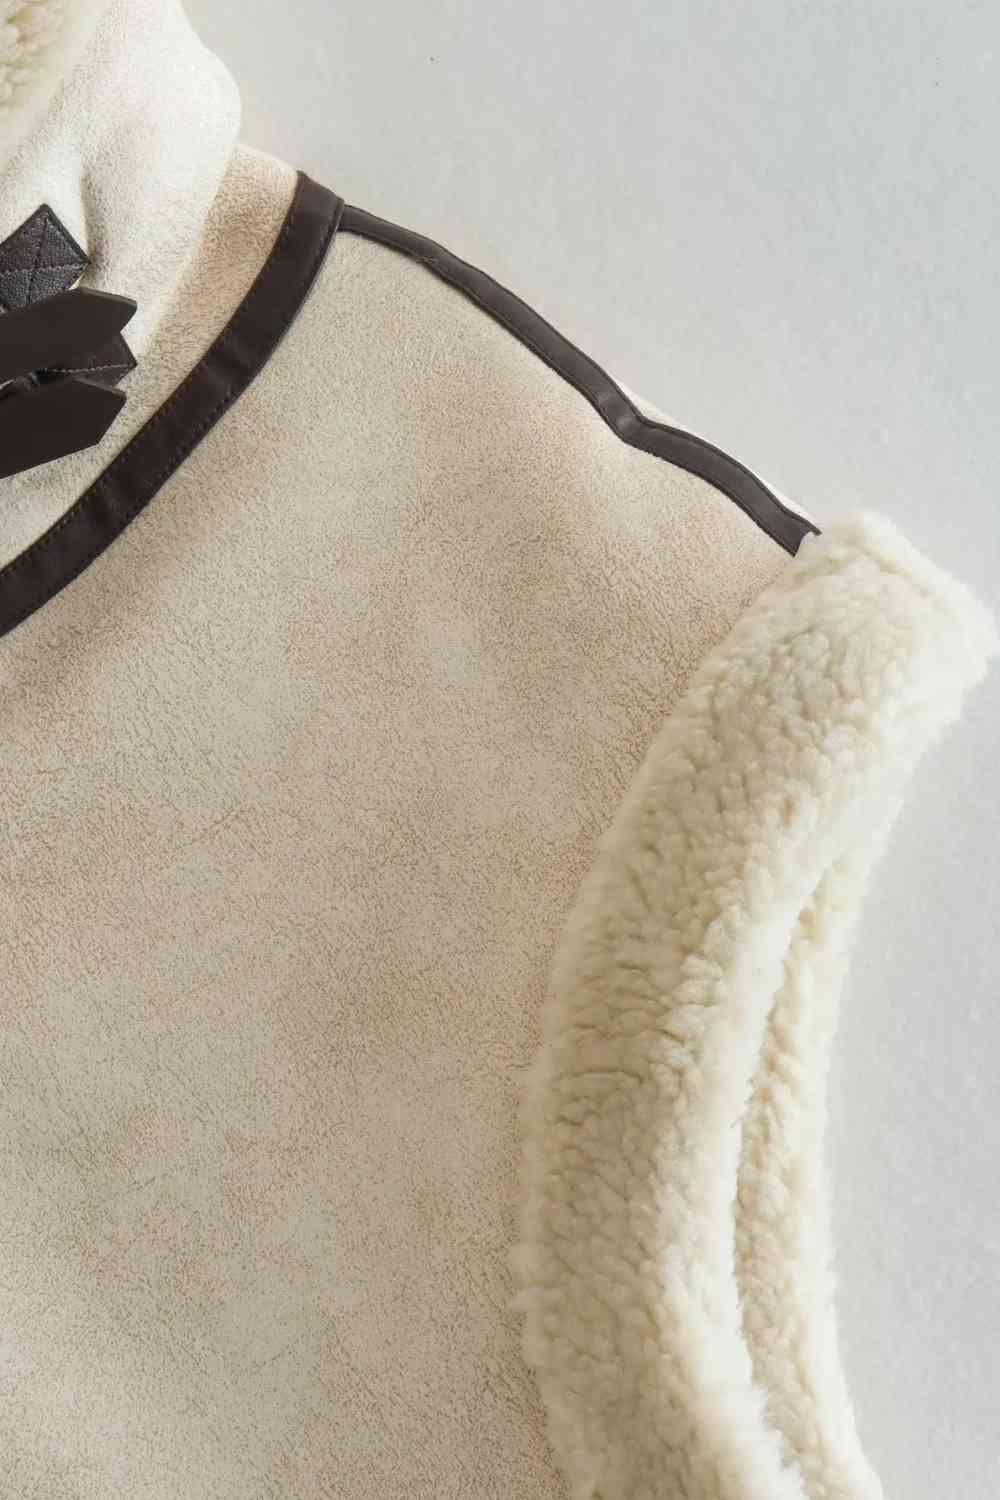 Collared Zip-Up Suede Sherpa Vest - Immenzive